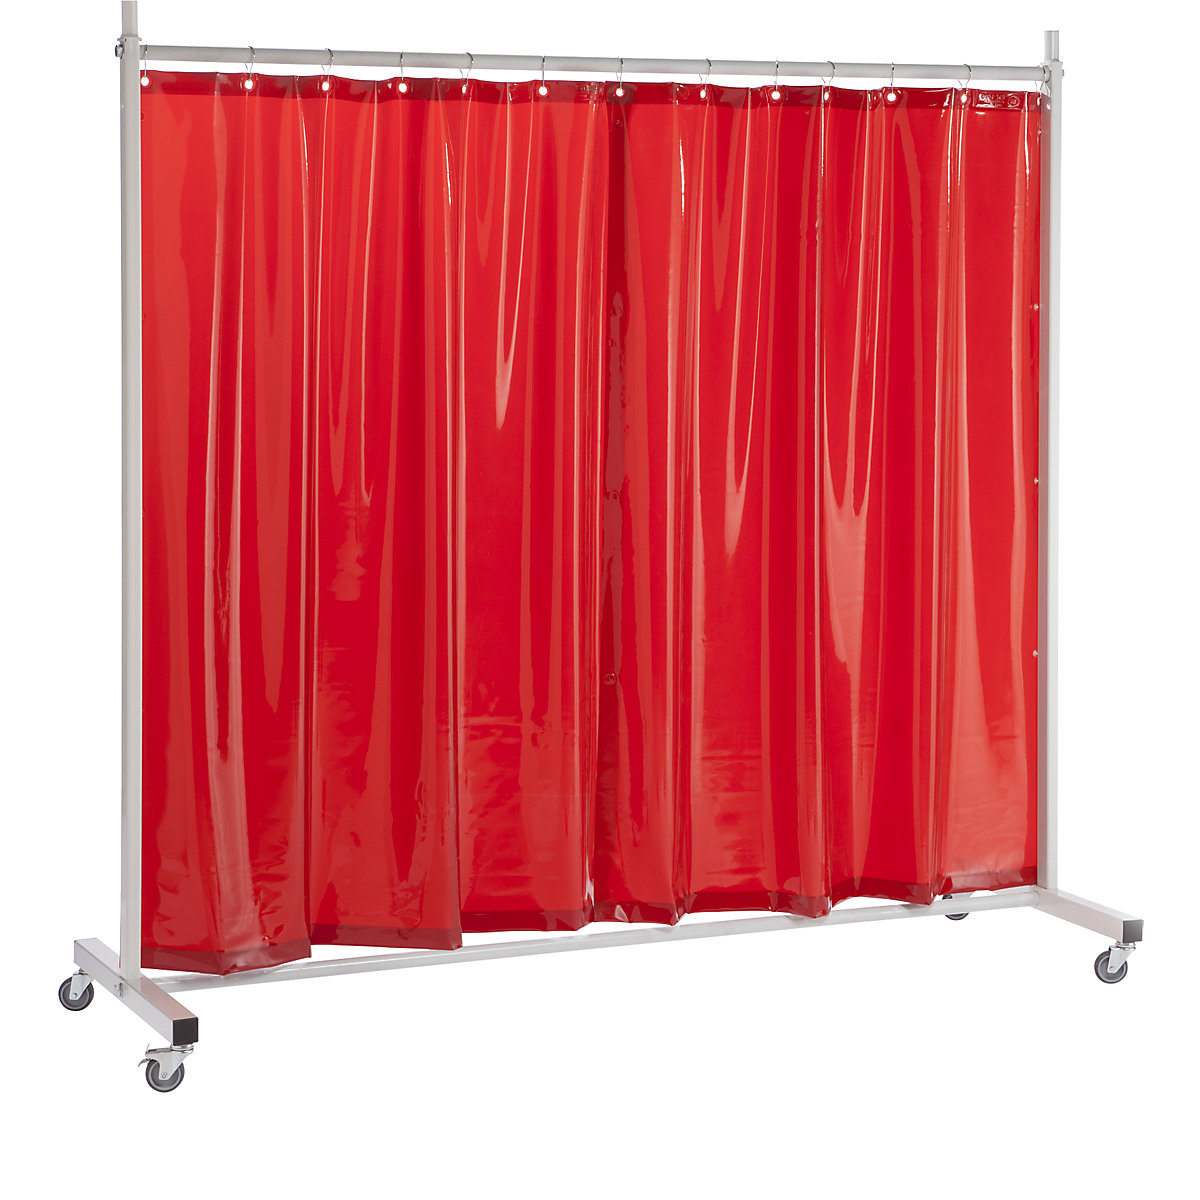 Welder's screen, mobile, with tarp curtain, red, WxH 2100 x 2100 mm, 1-part-4